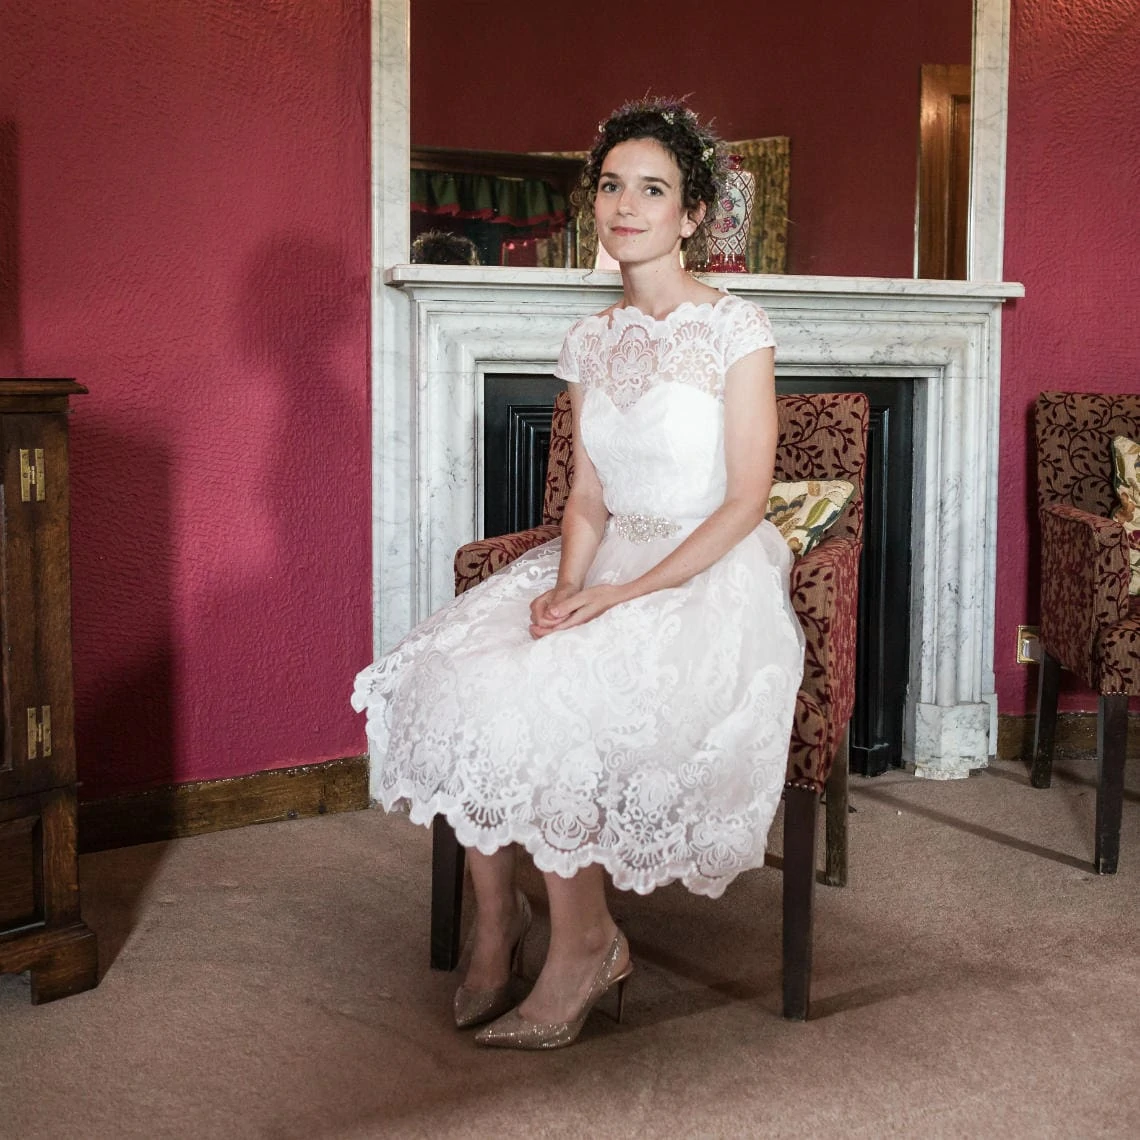 Bedroom - bridal pose on chair